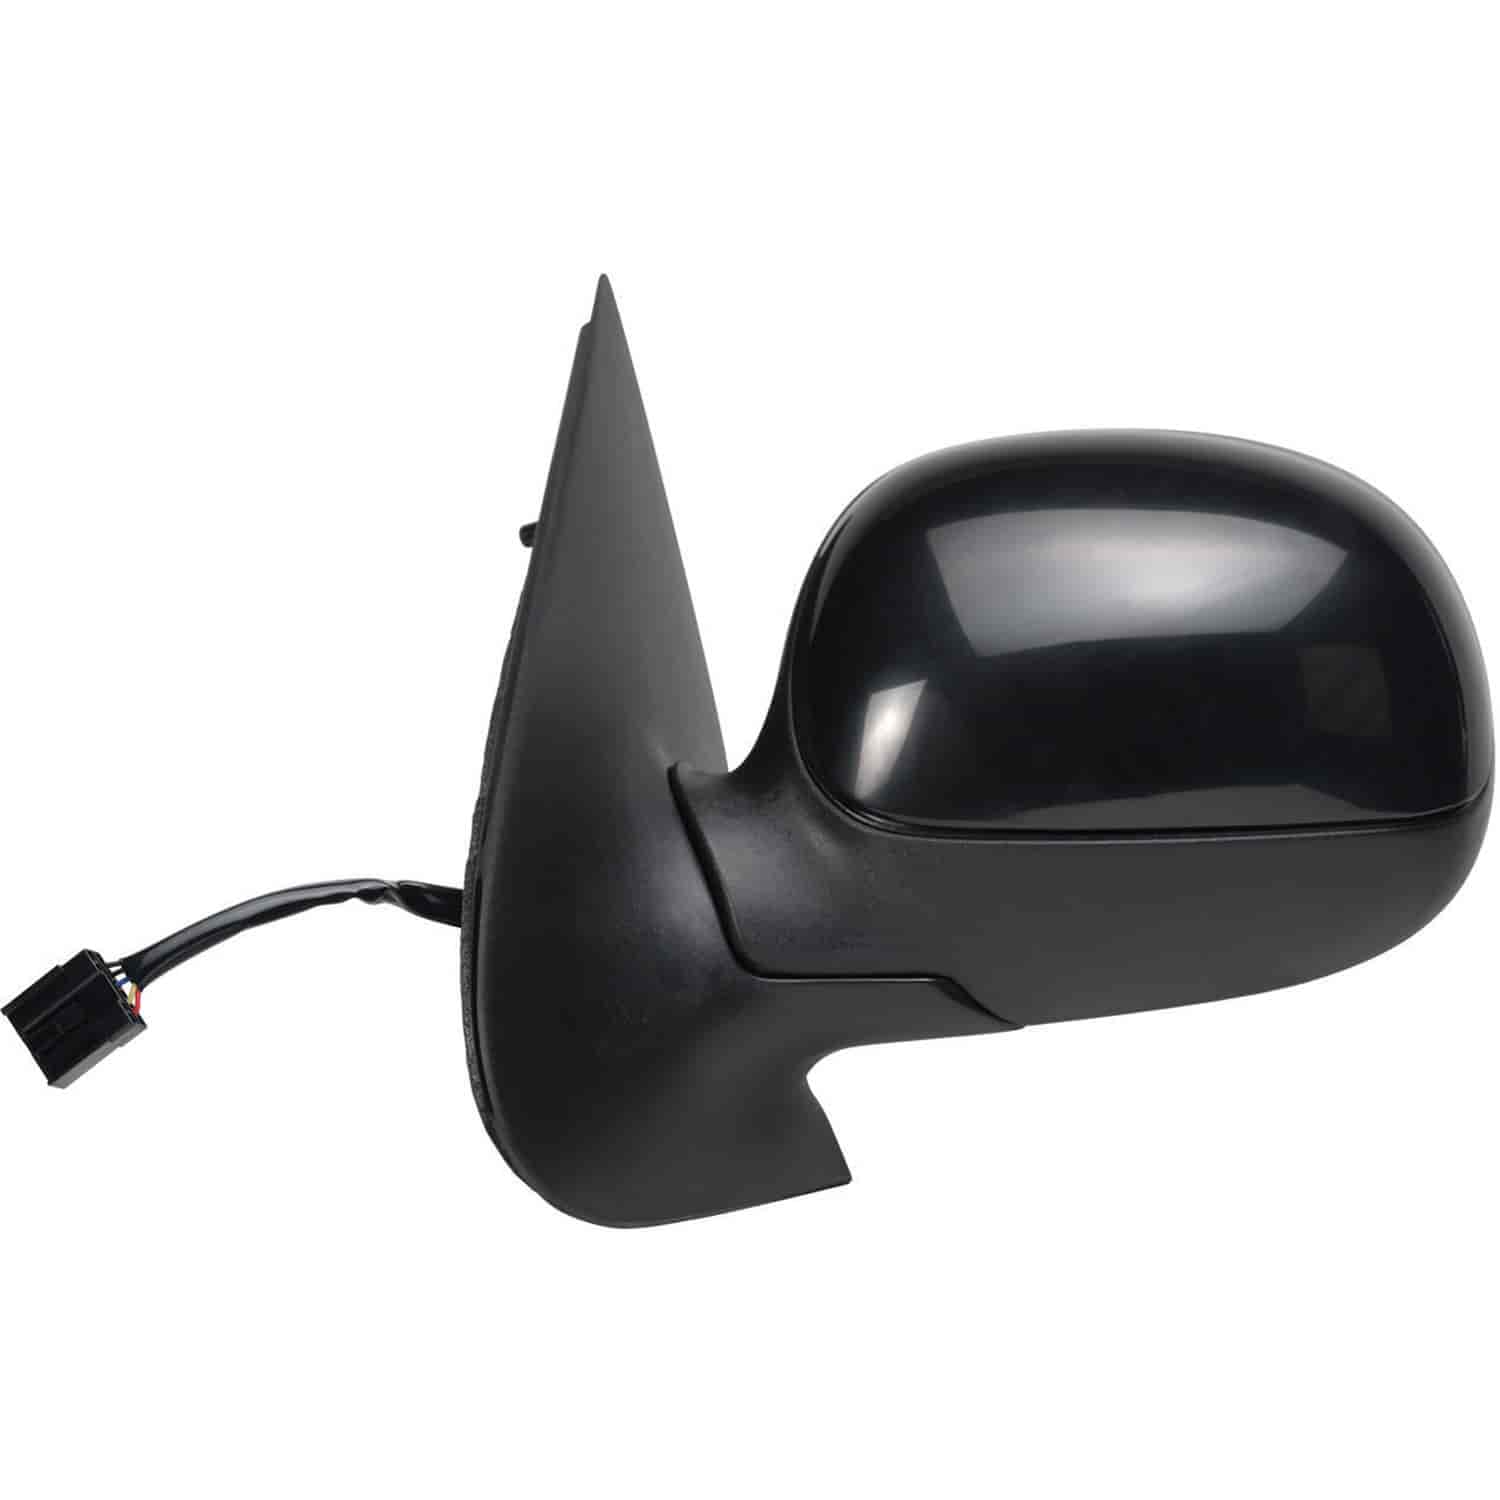 OEM Style Replacement mirror for 97-02 Ford Expedition driver side mirror tested to fit and function